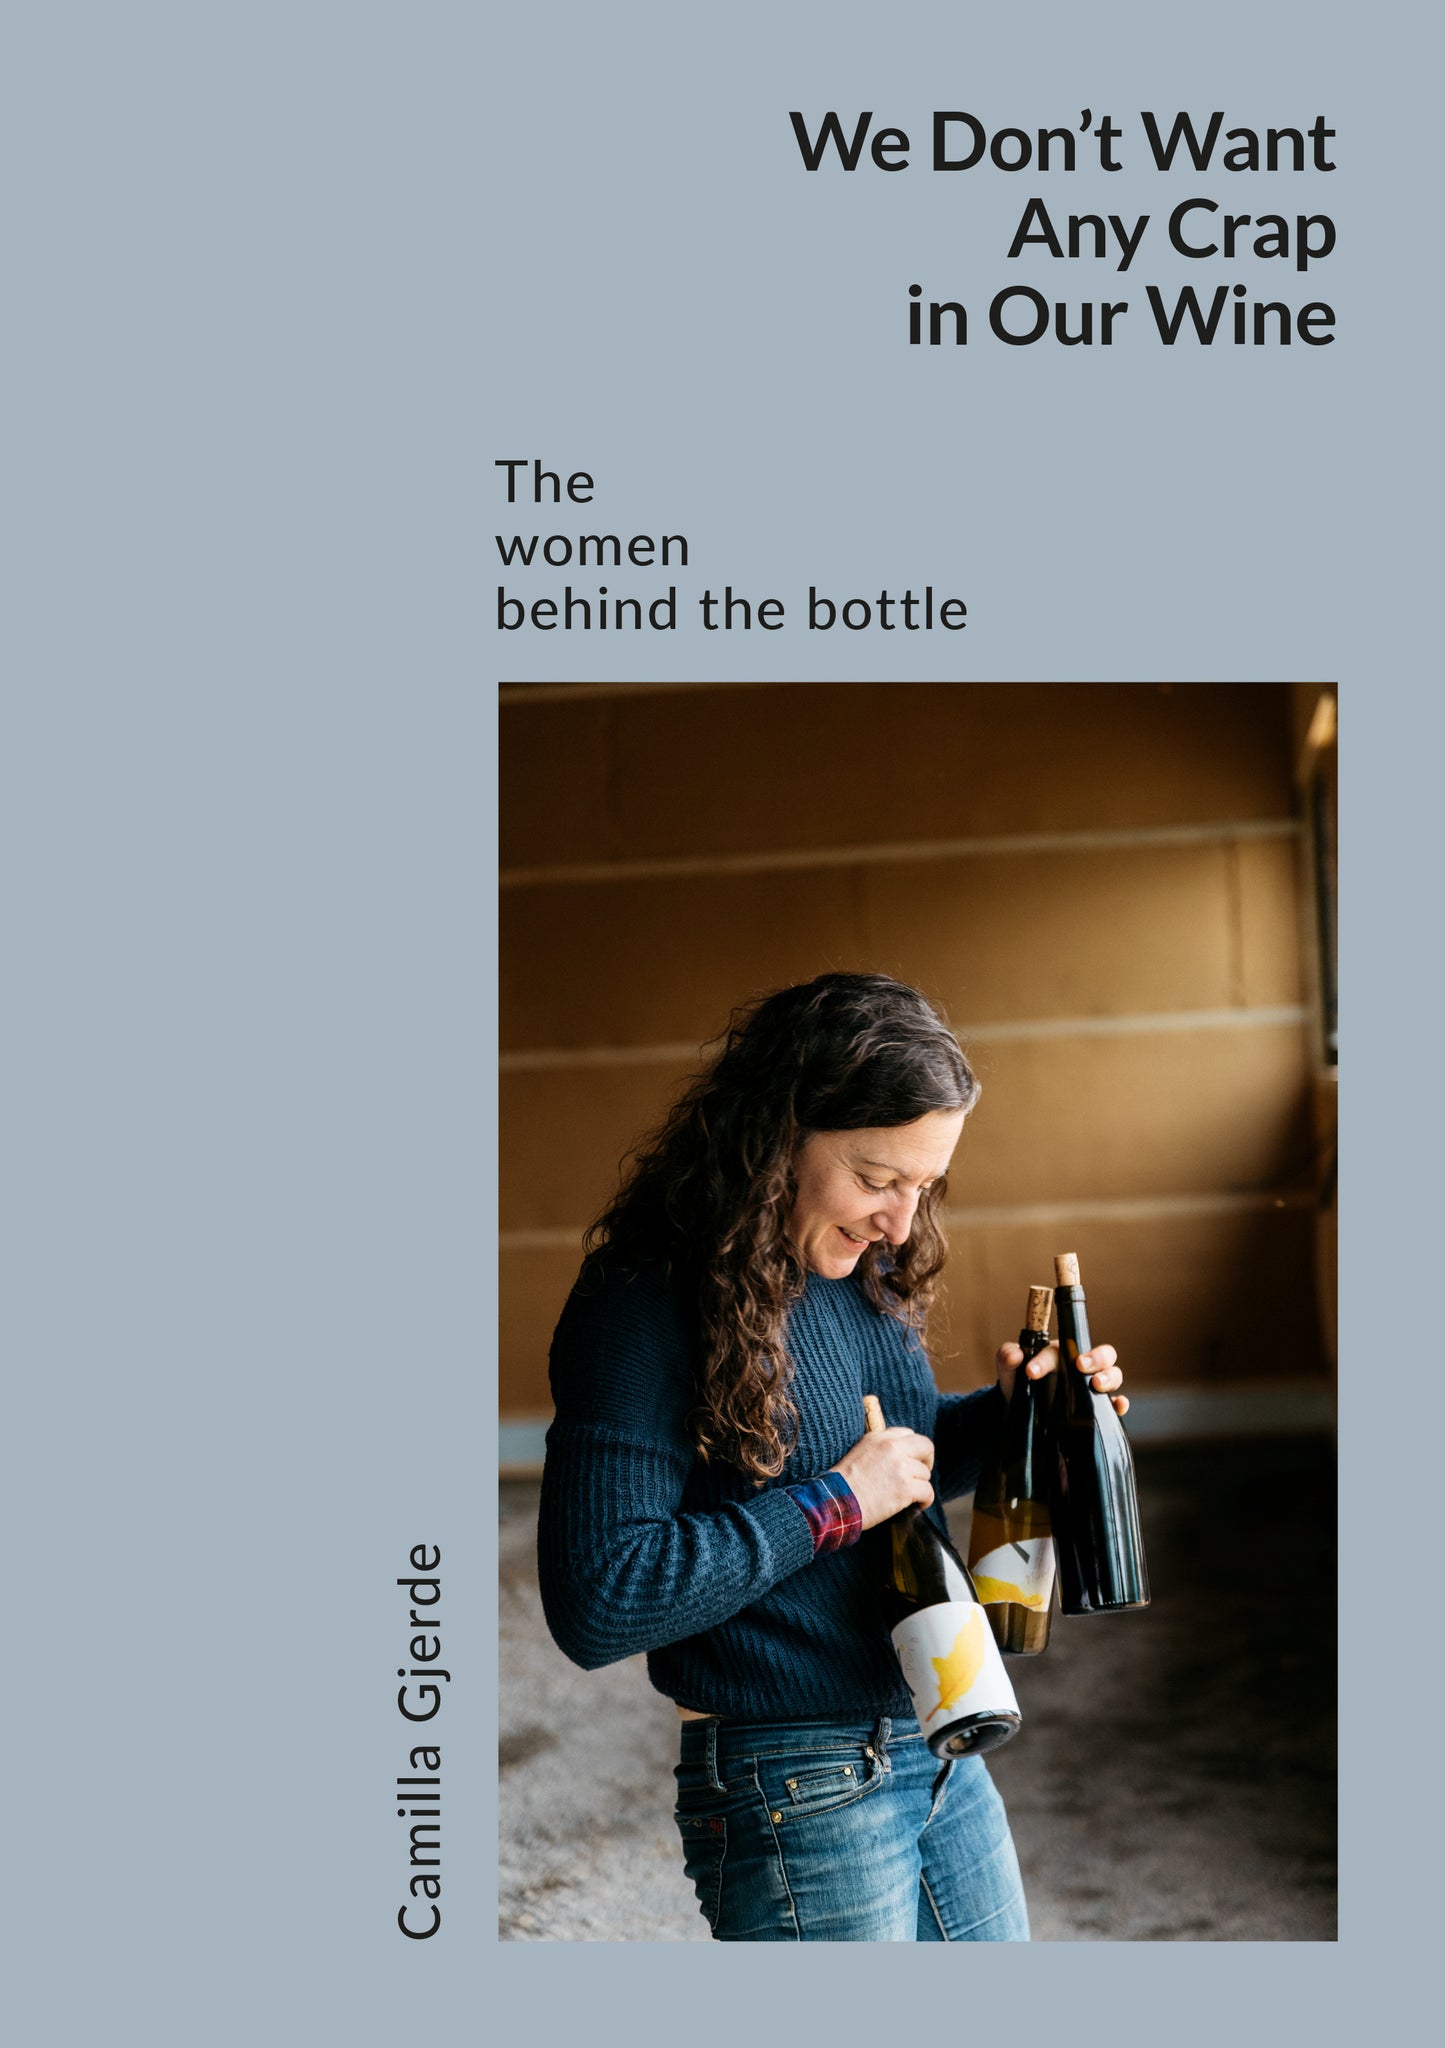 We Don't Want Any Crap in Our Wine - The women behind the bottle